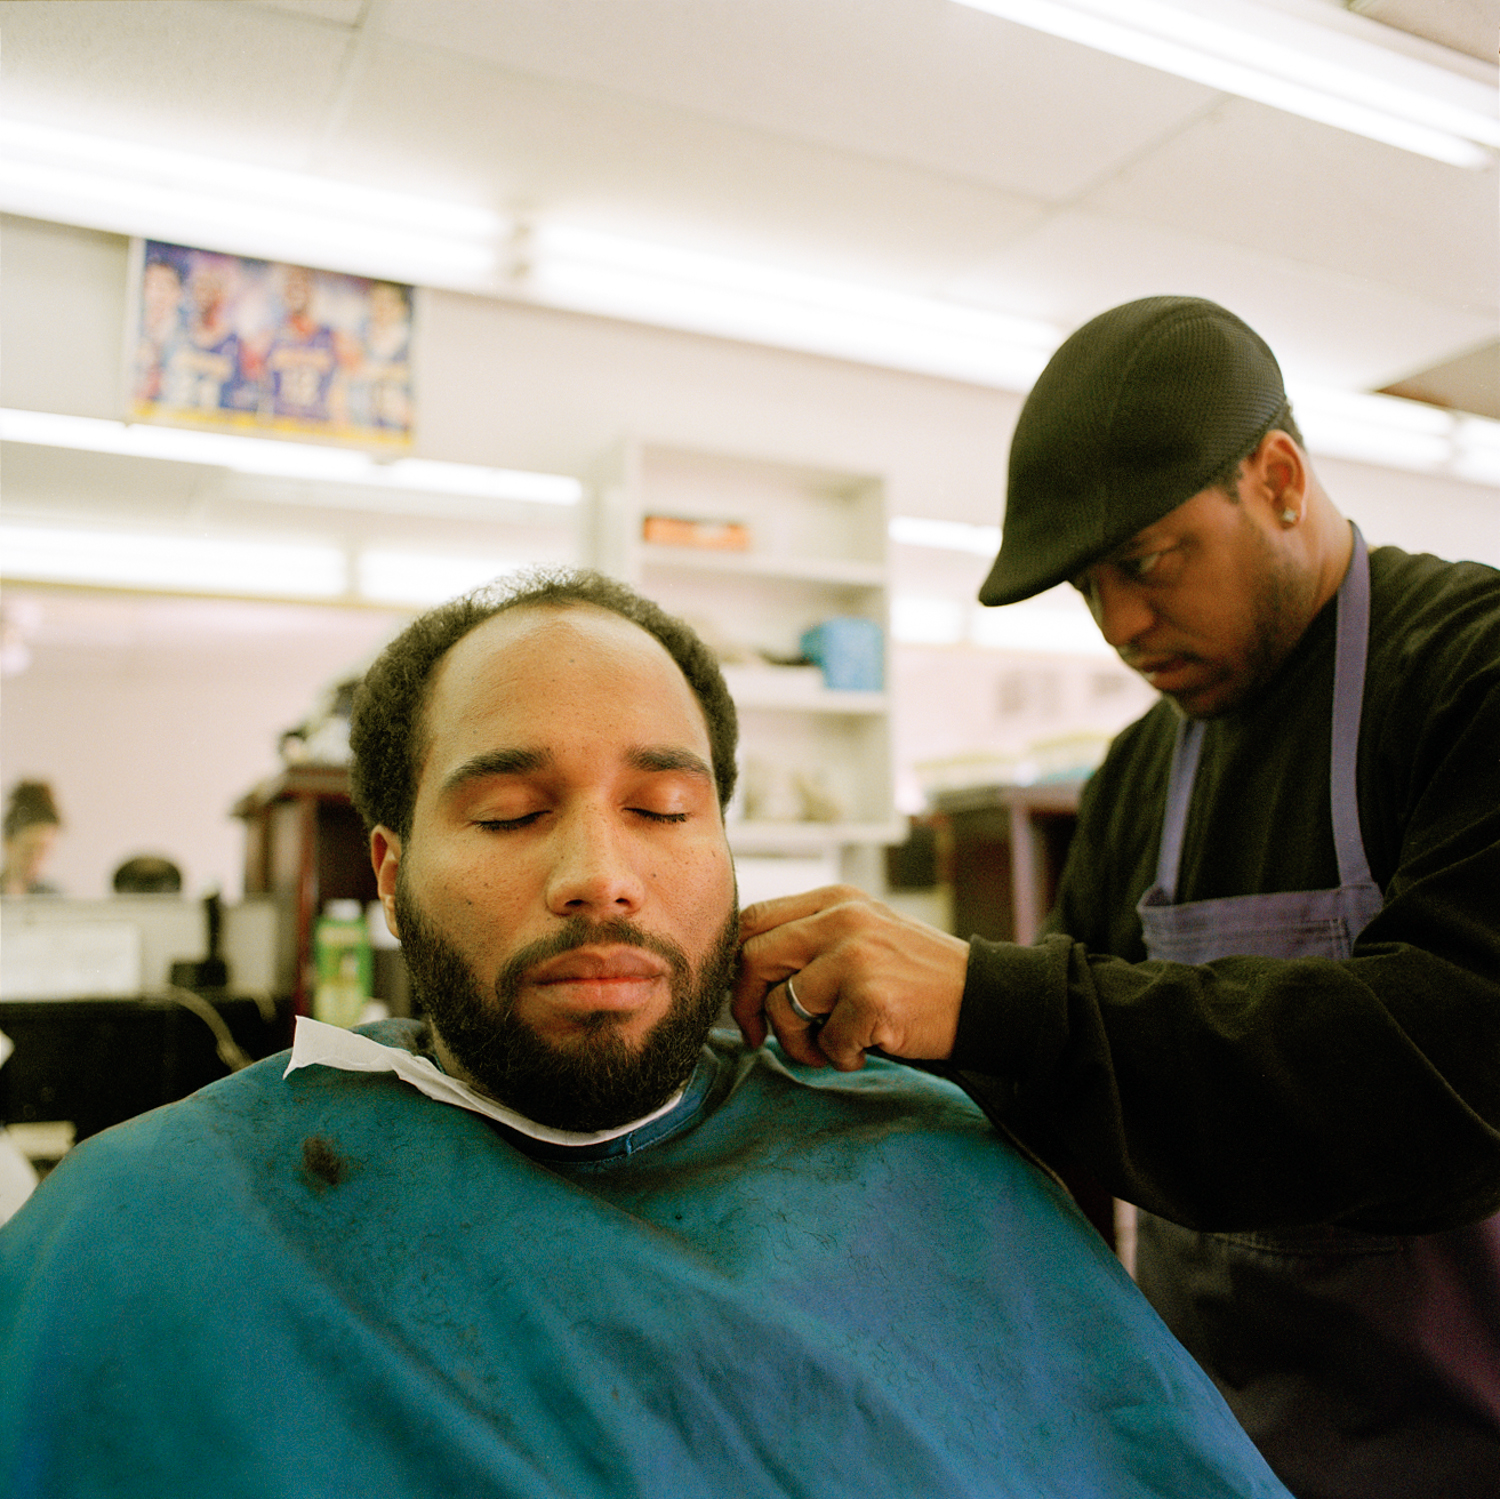   Isaac used to cut hair in the neighborhood, then he opened up his own shop, Los Angeles  2013 